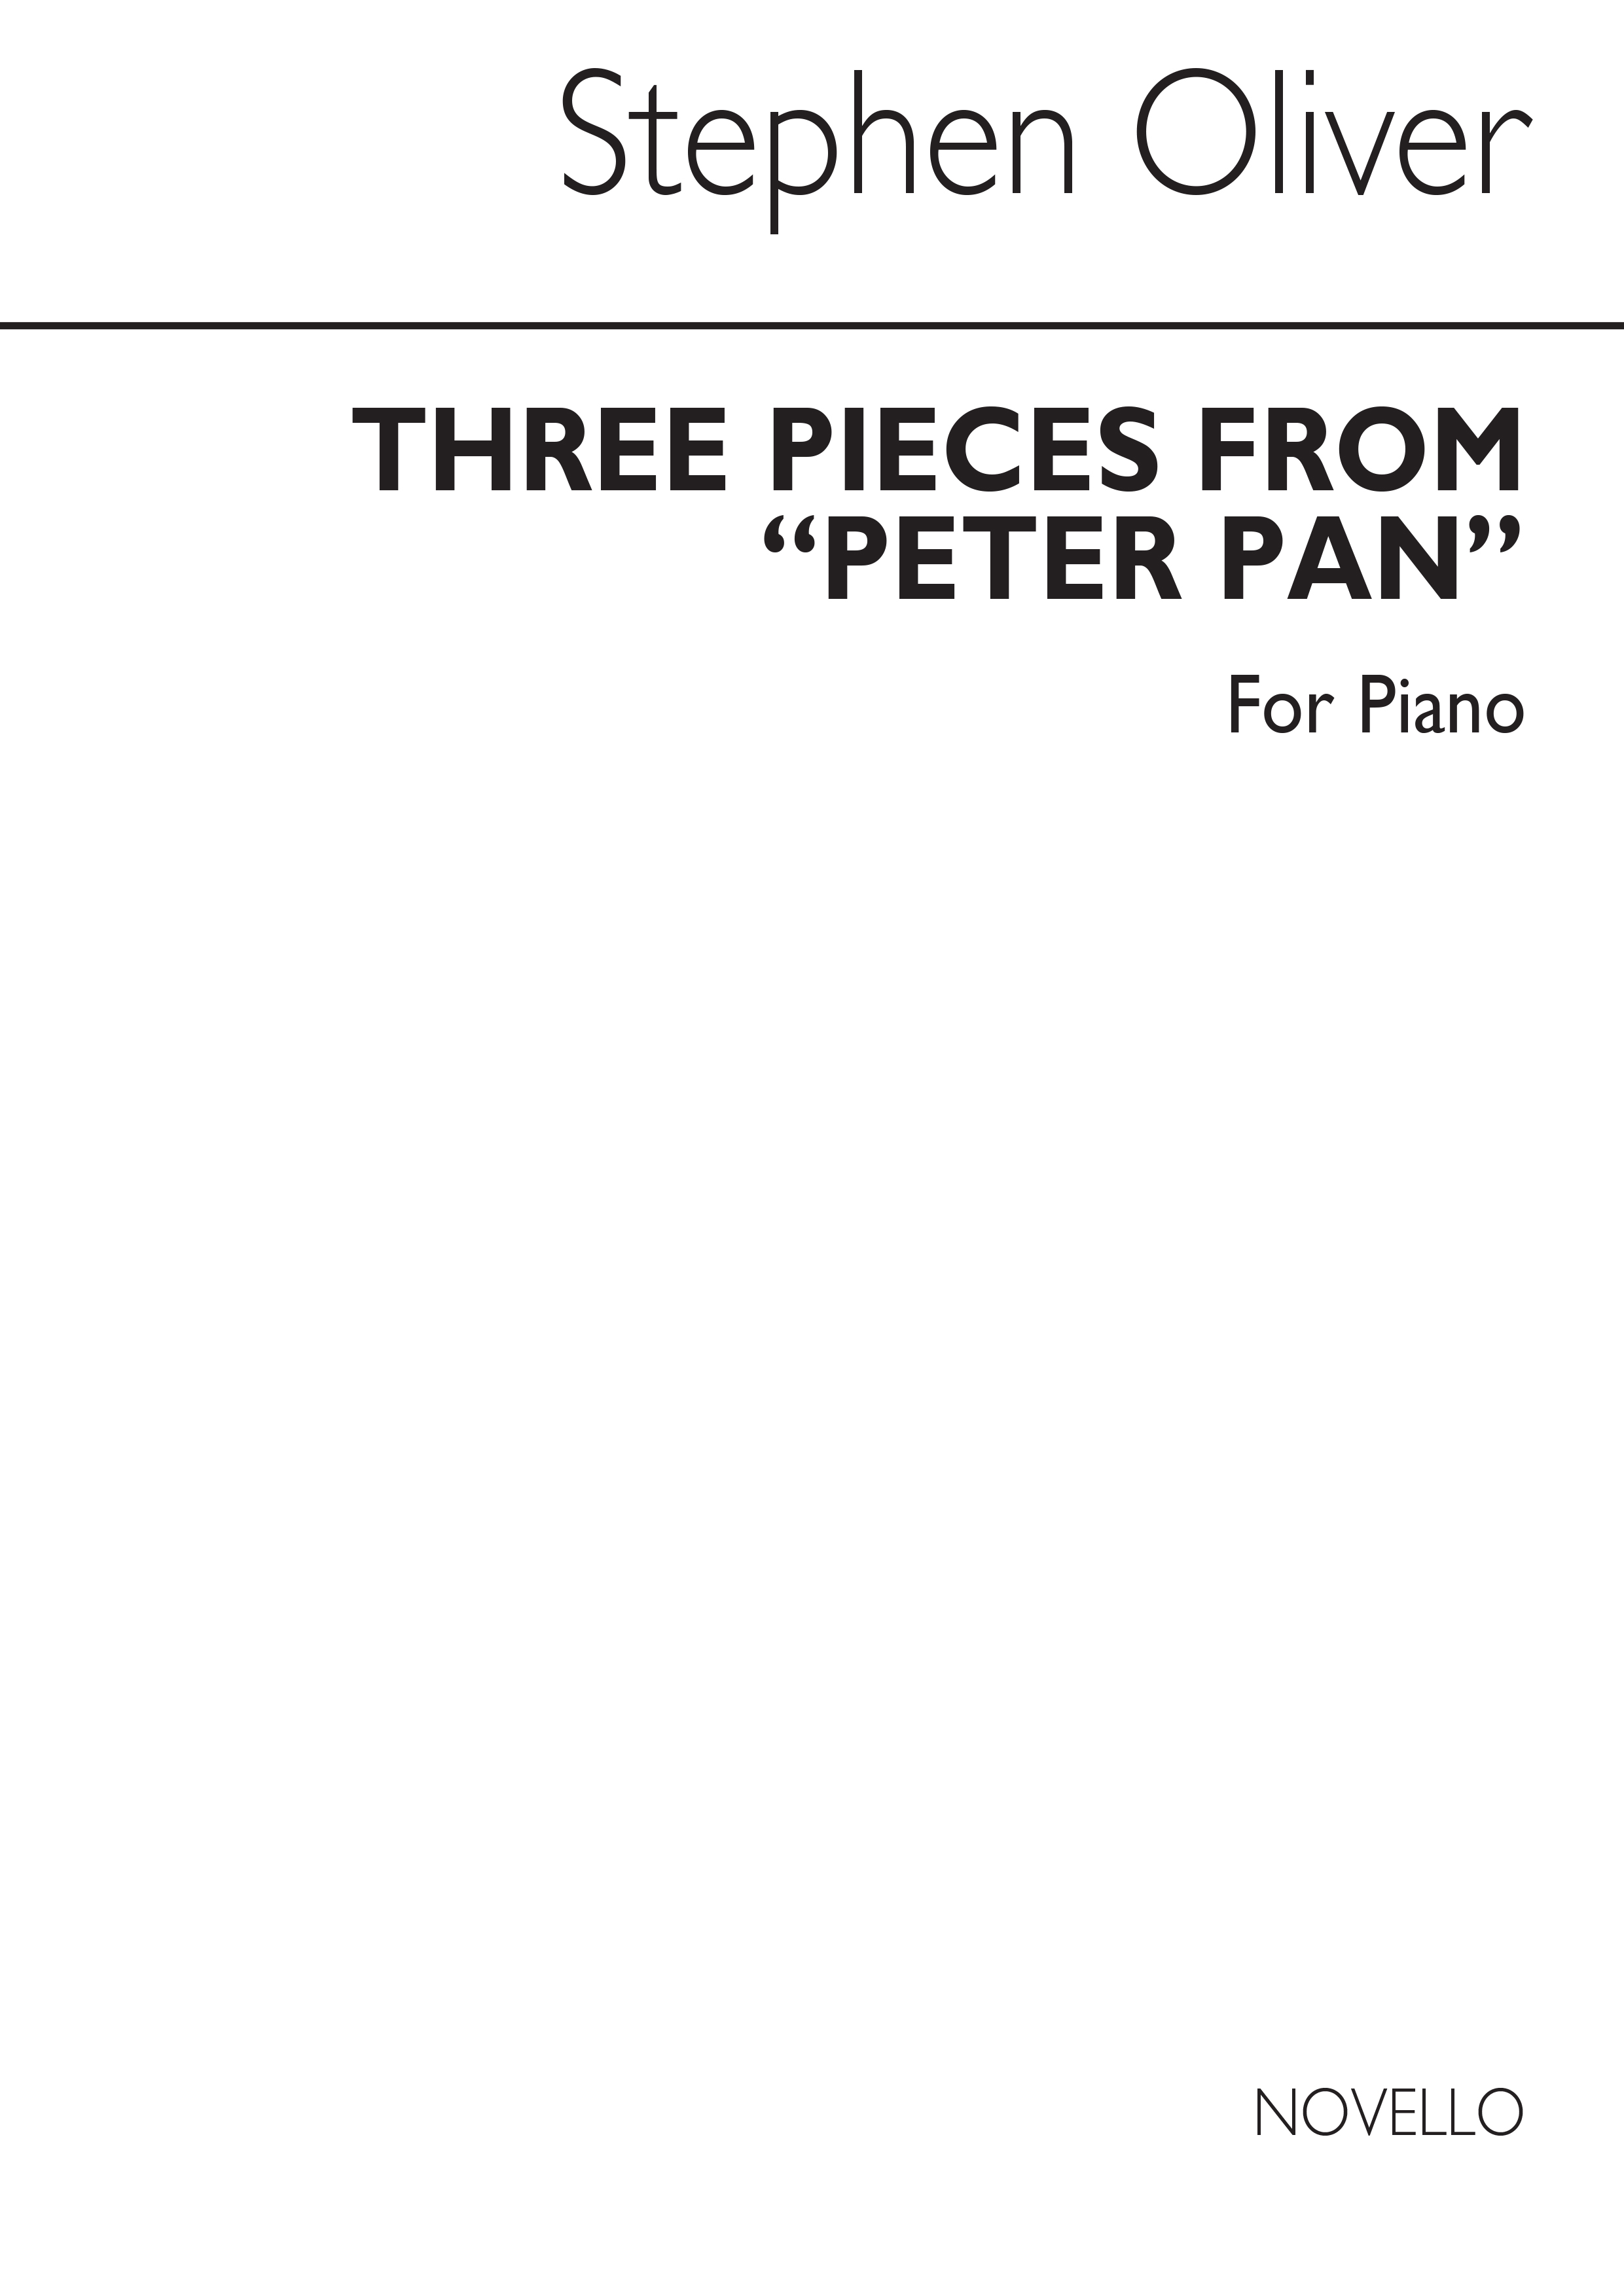 Stephen Oliver: Peter Pan Three Souvenir Pieces for Piano: Piano: Instrumental